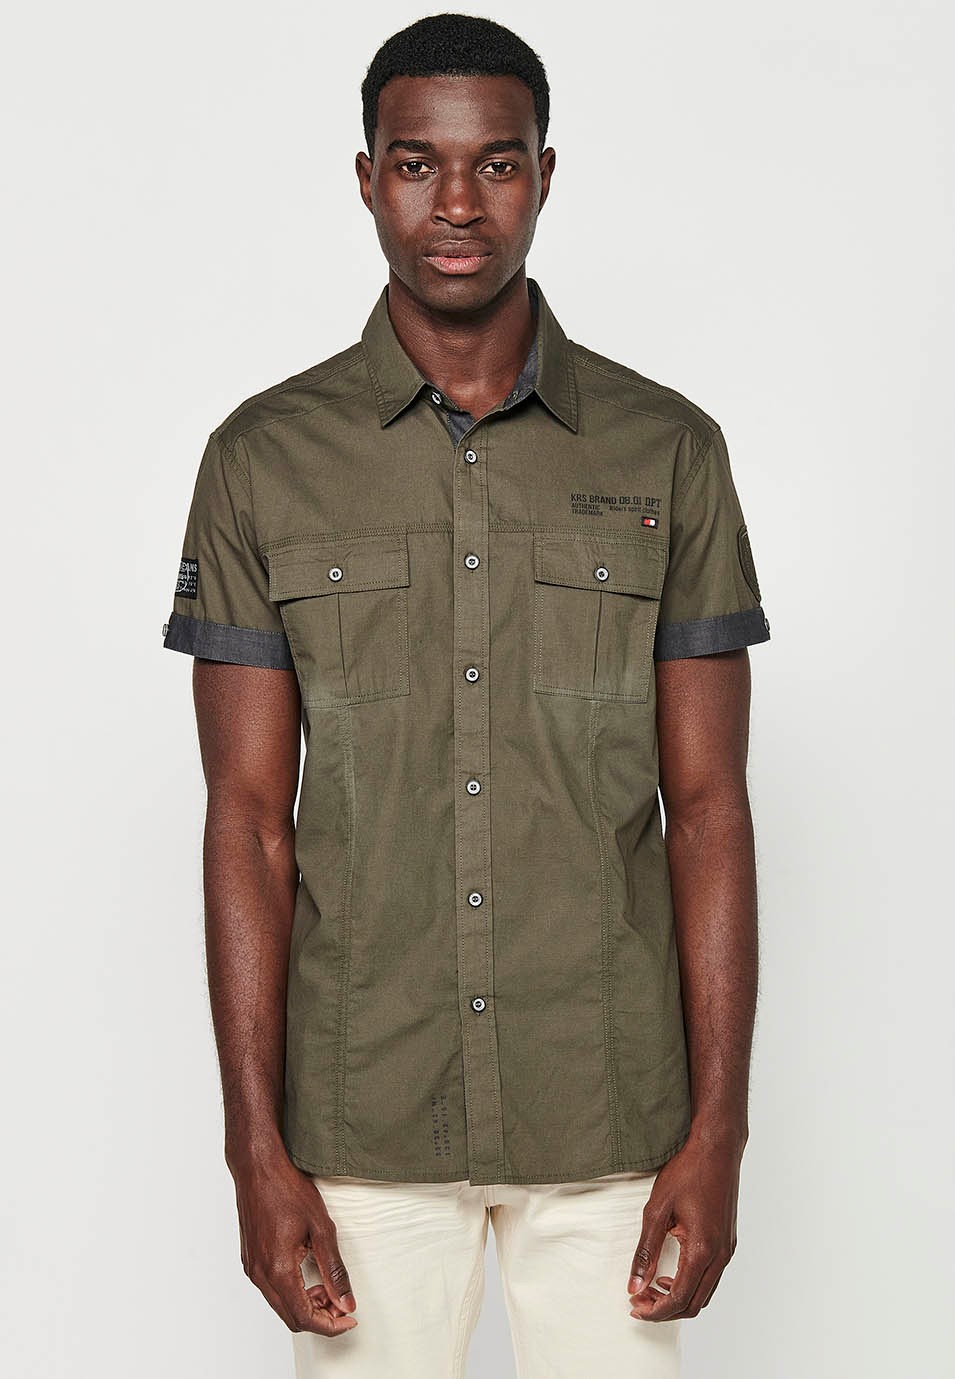 Short Sleeve Cotton Shirt with Button Front Closure and Front Flap Pockets in Olive Color for Men 5